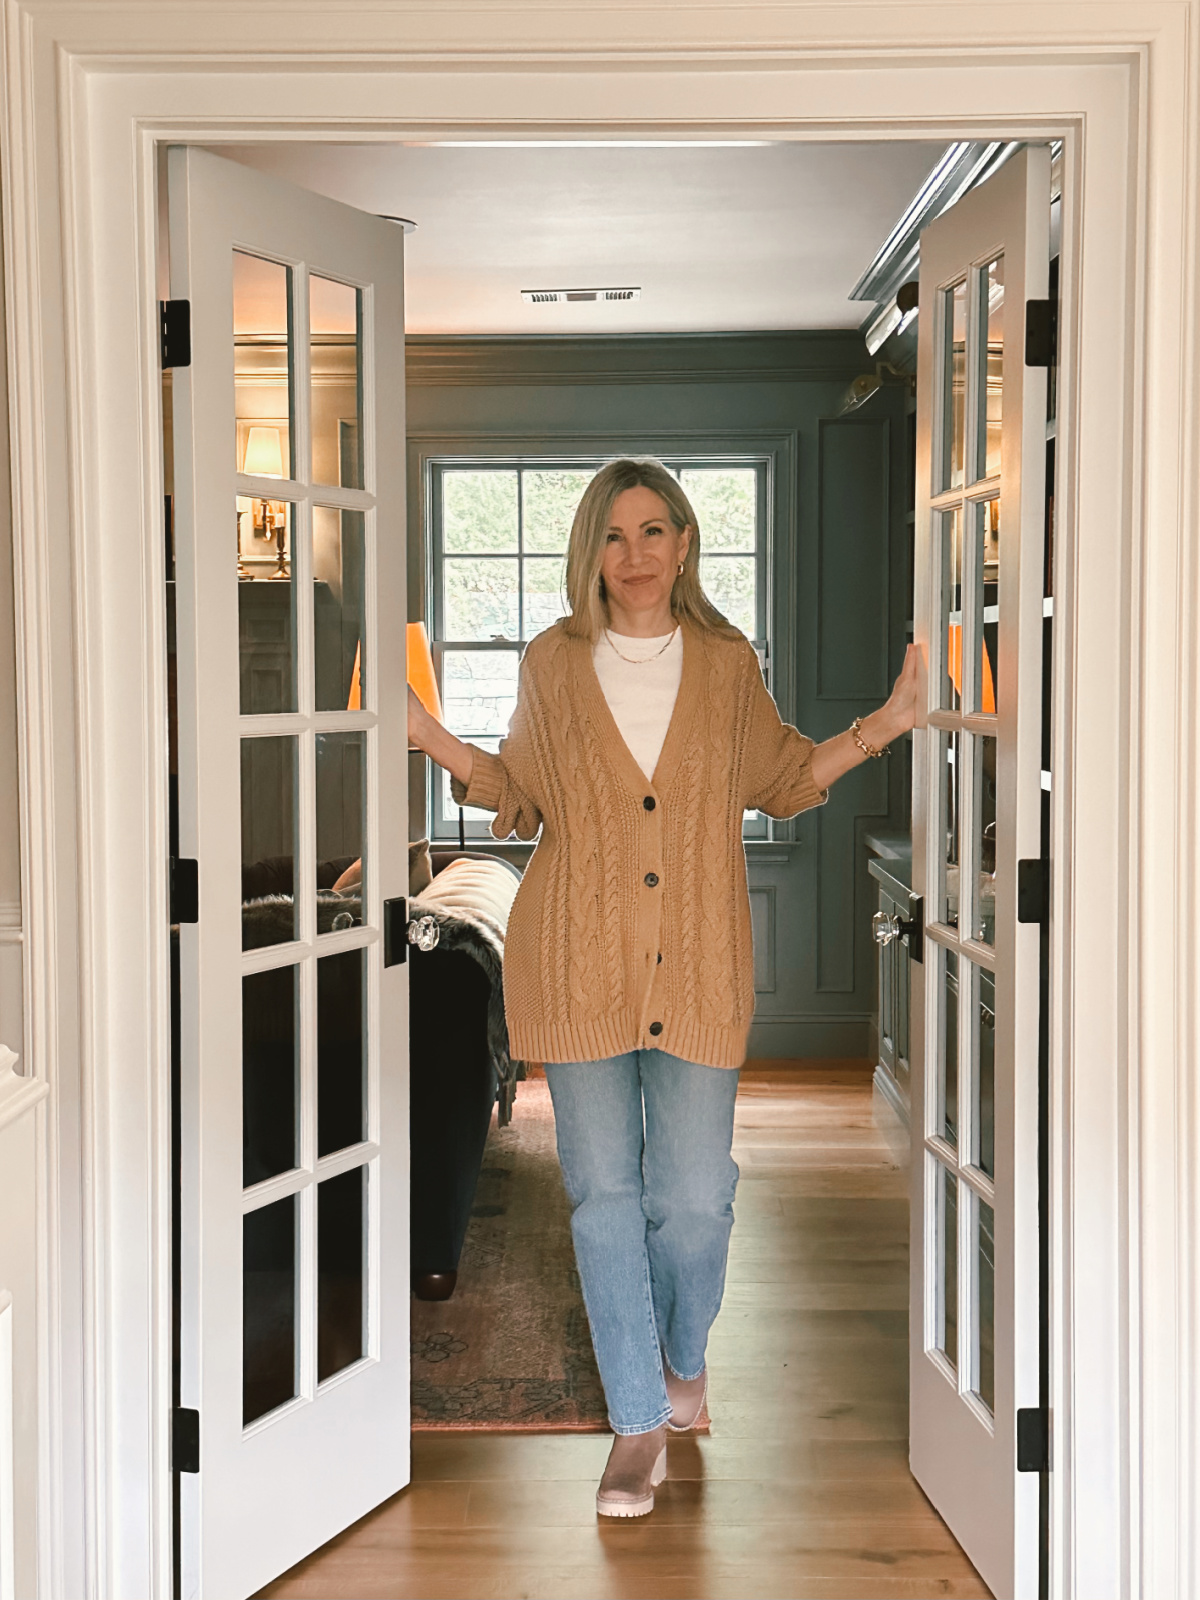 Woman standing in doorway wearing Quince cardigan and jeans.